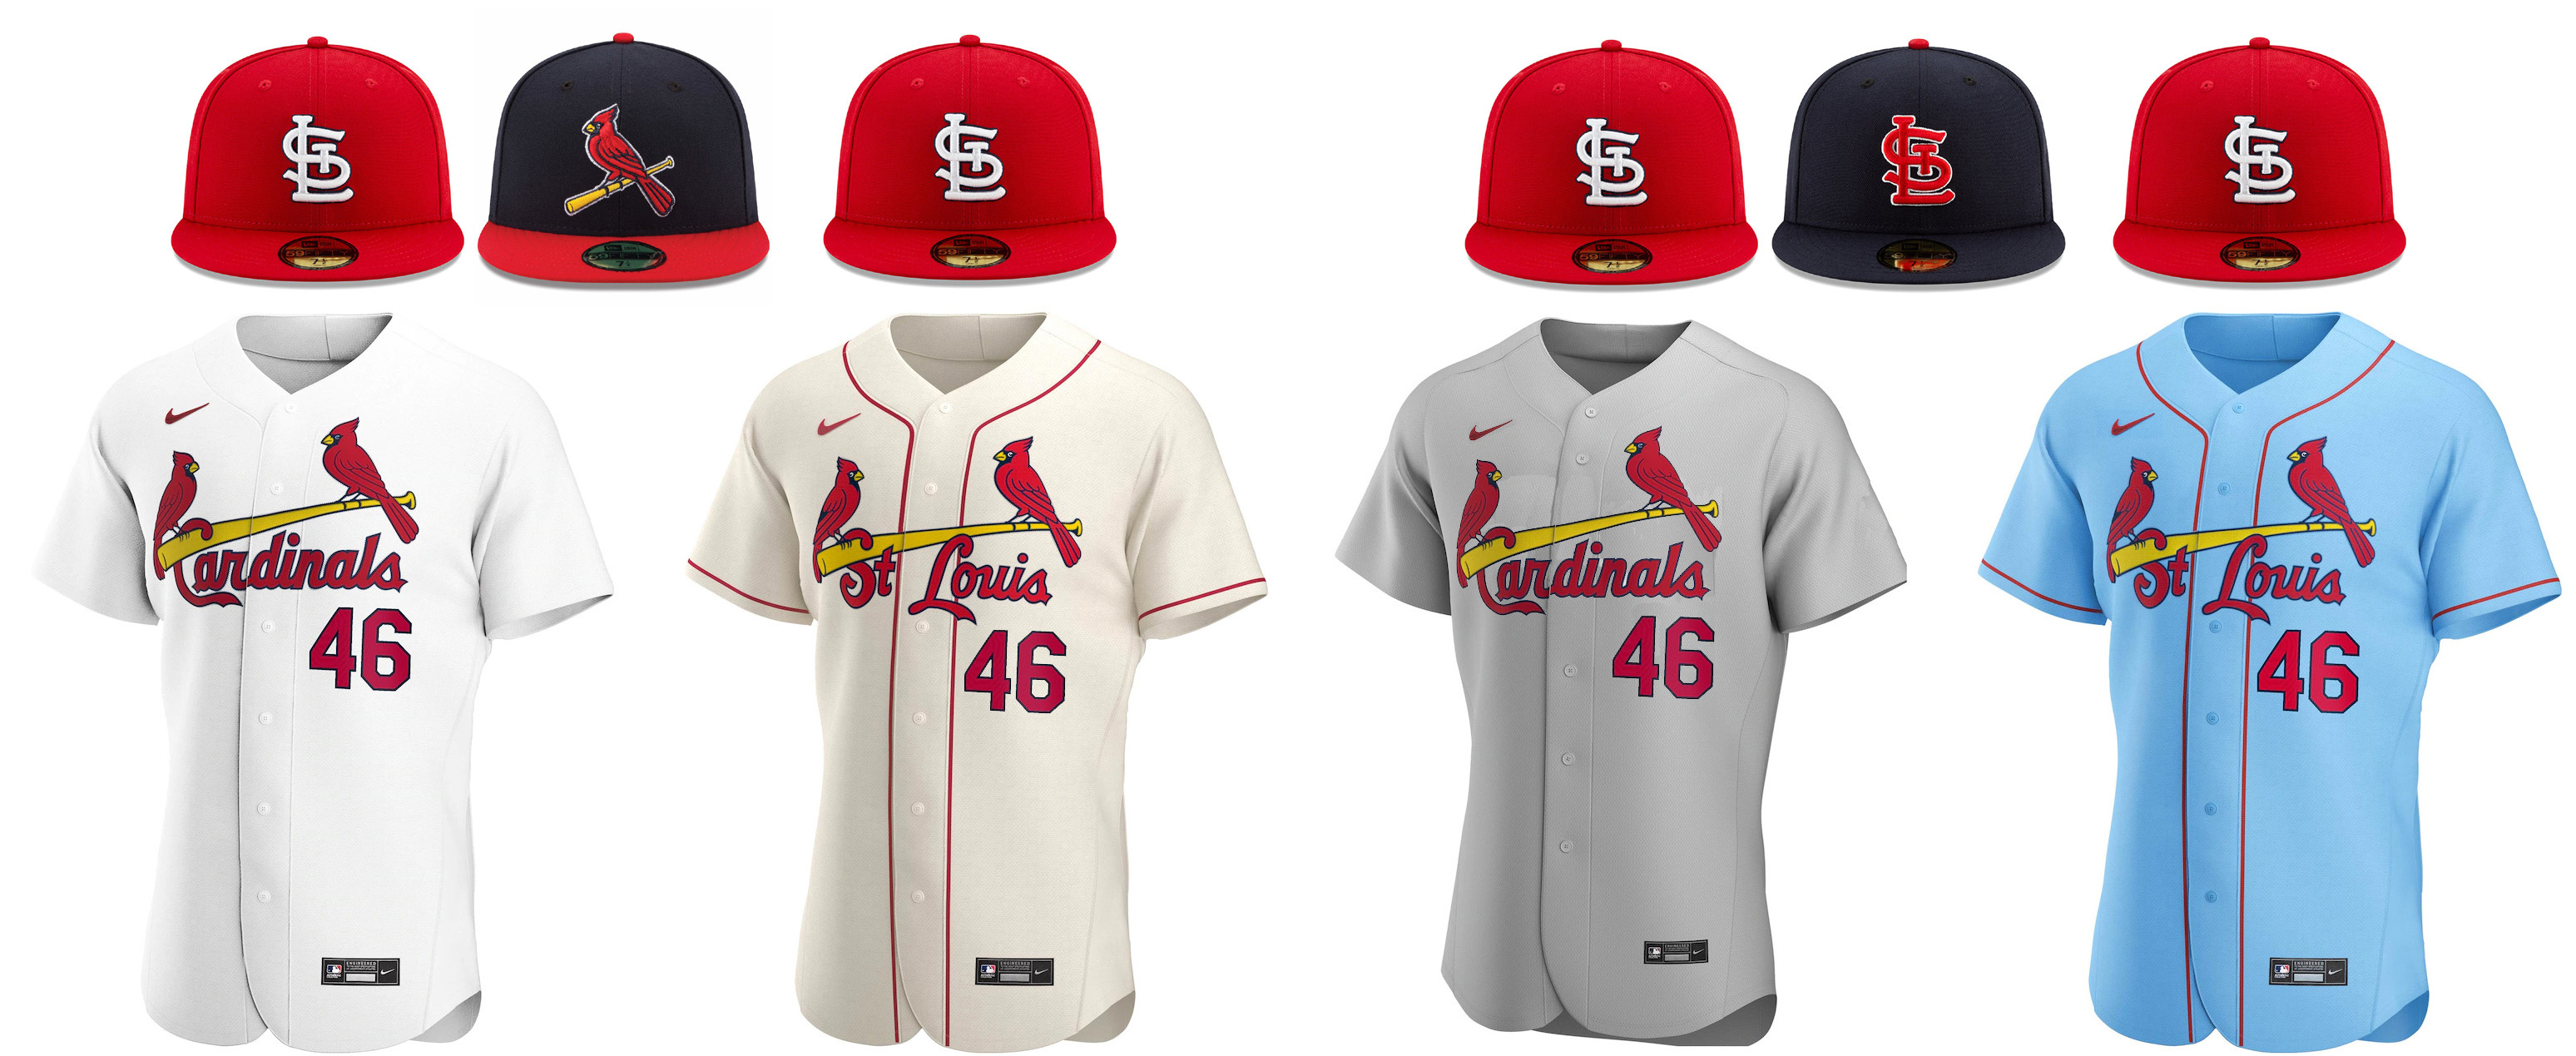 CapsOn for the St. Louis Cardinals - Economy of Style